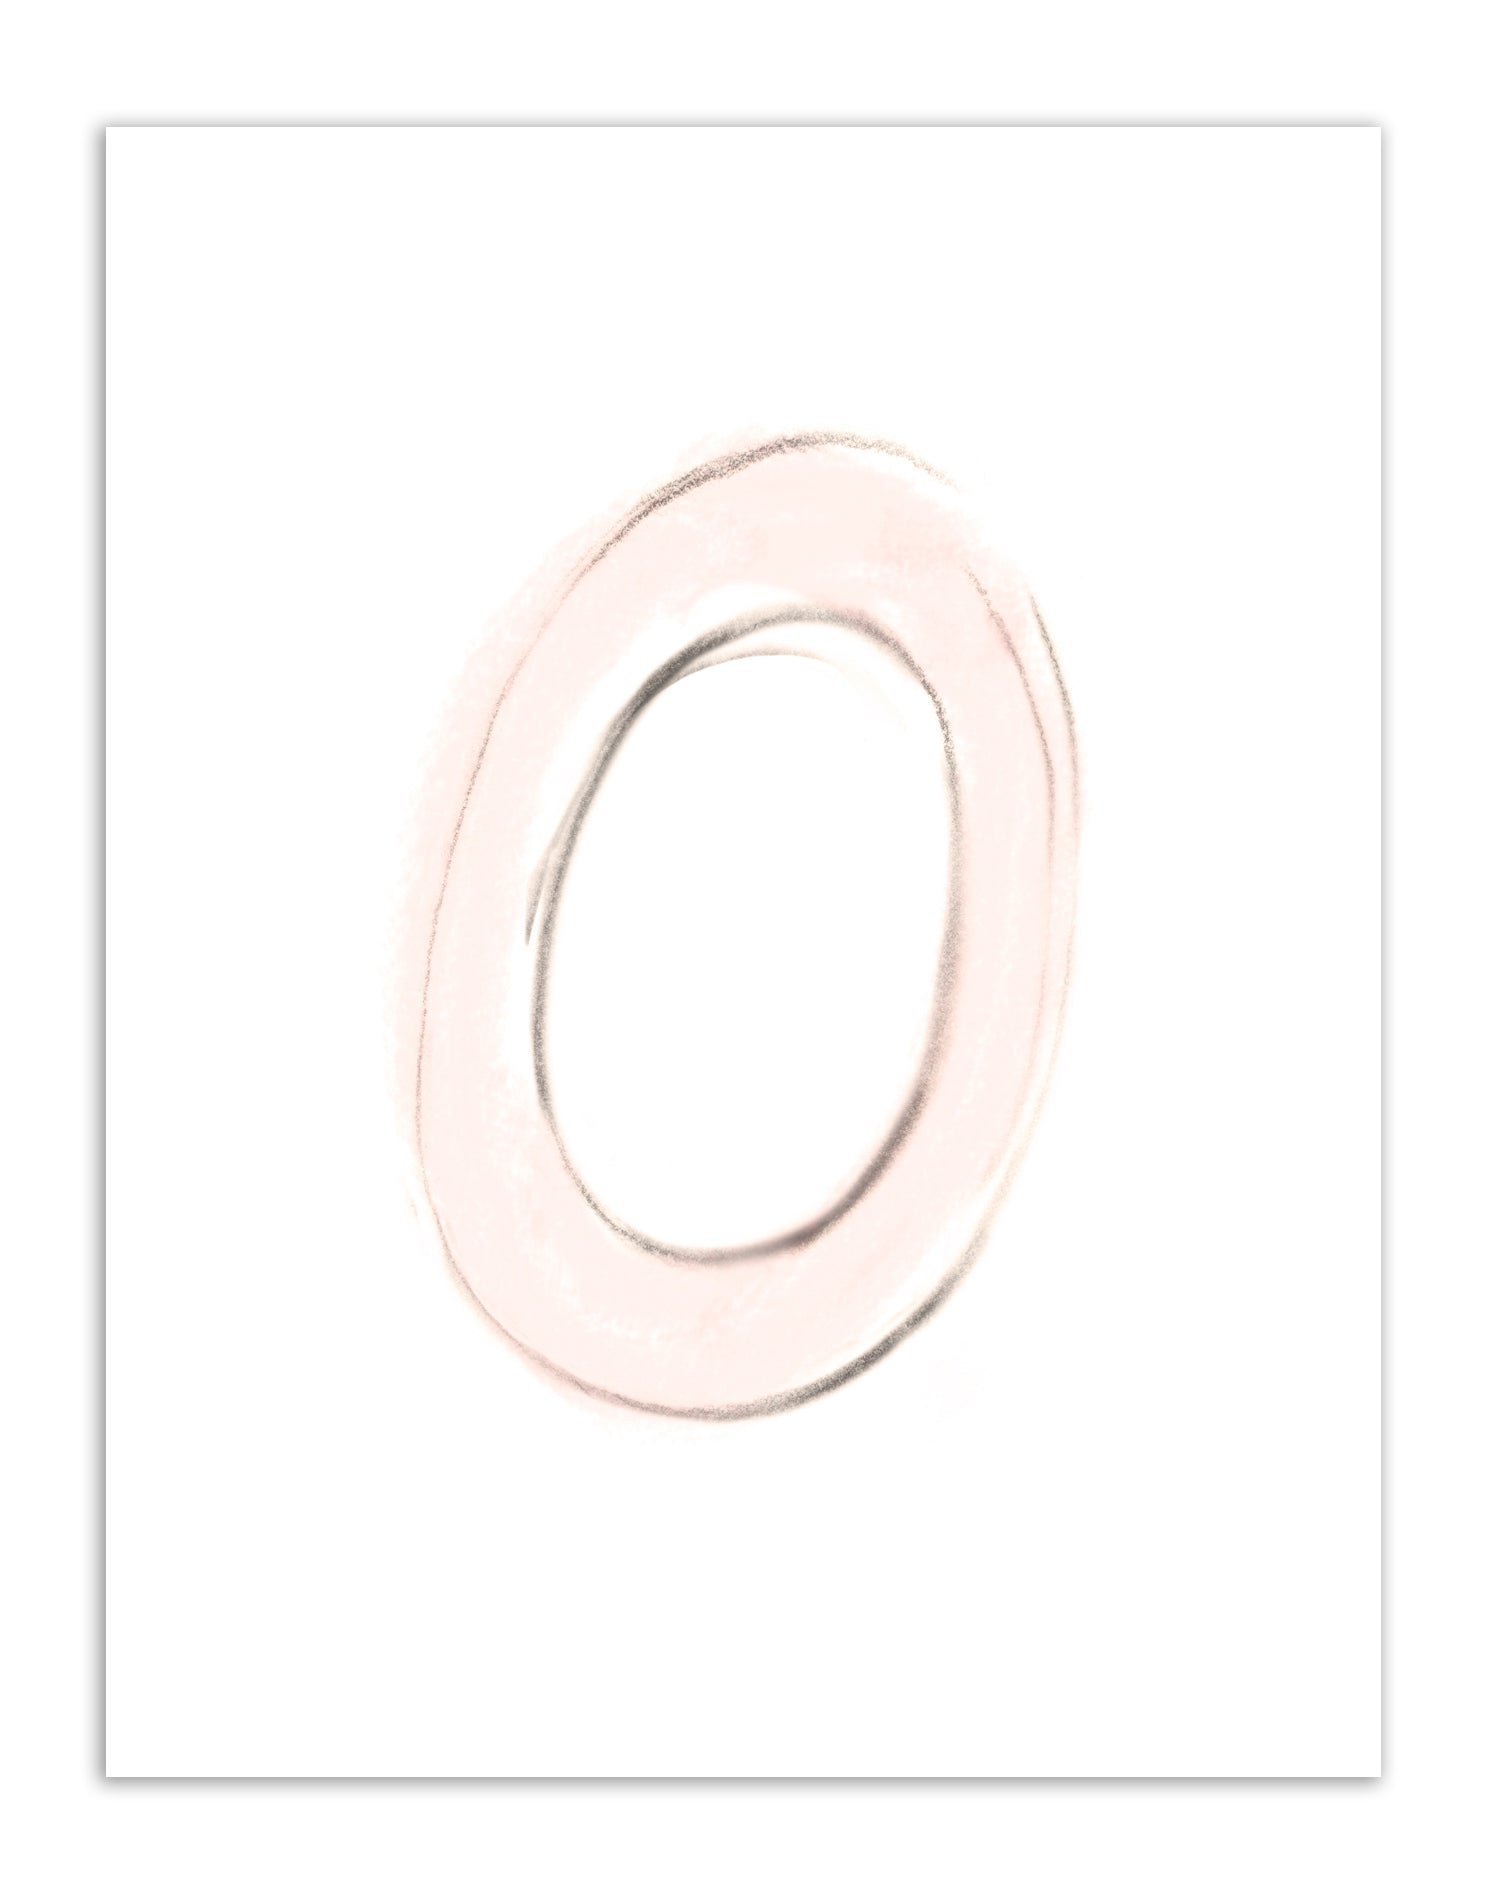 Drawing of the letter O in shades of pink and sepia - Studio Q - Art by Nicky Quartermaine Scott